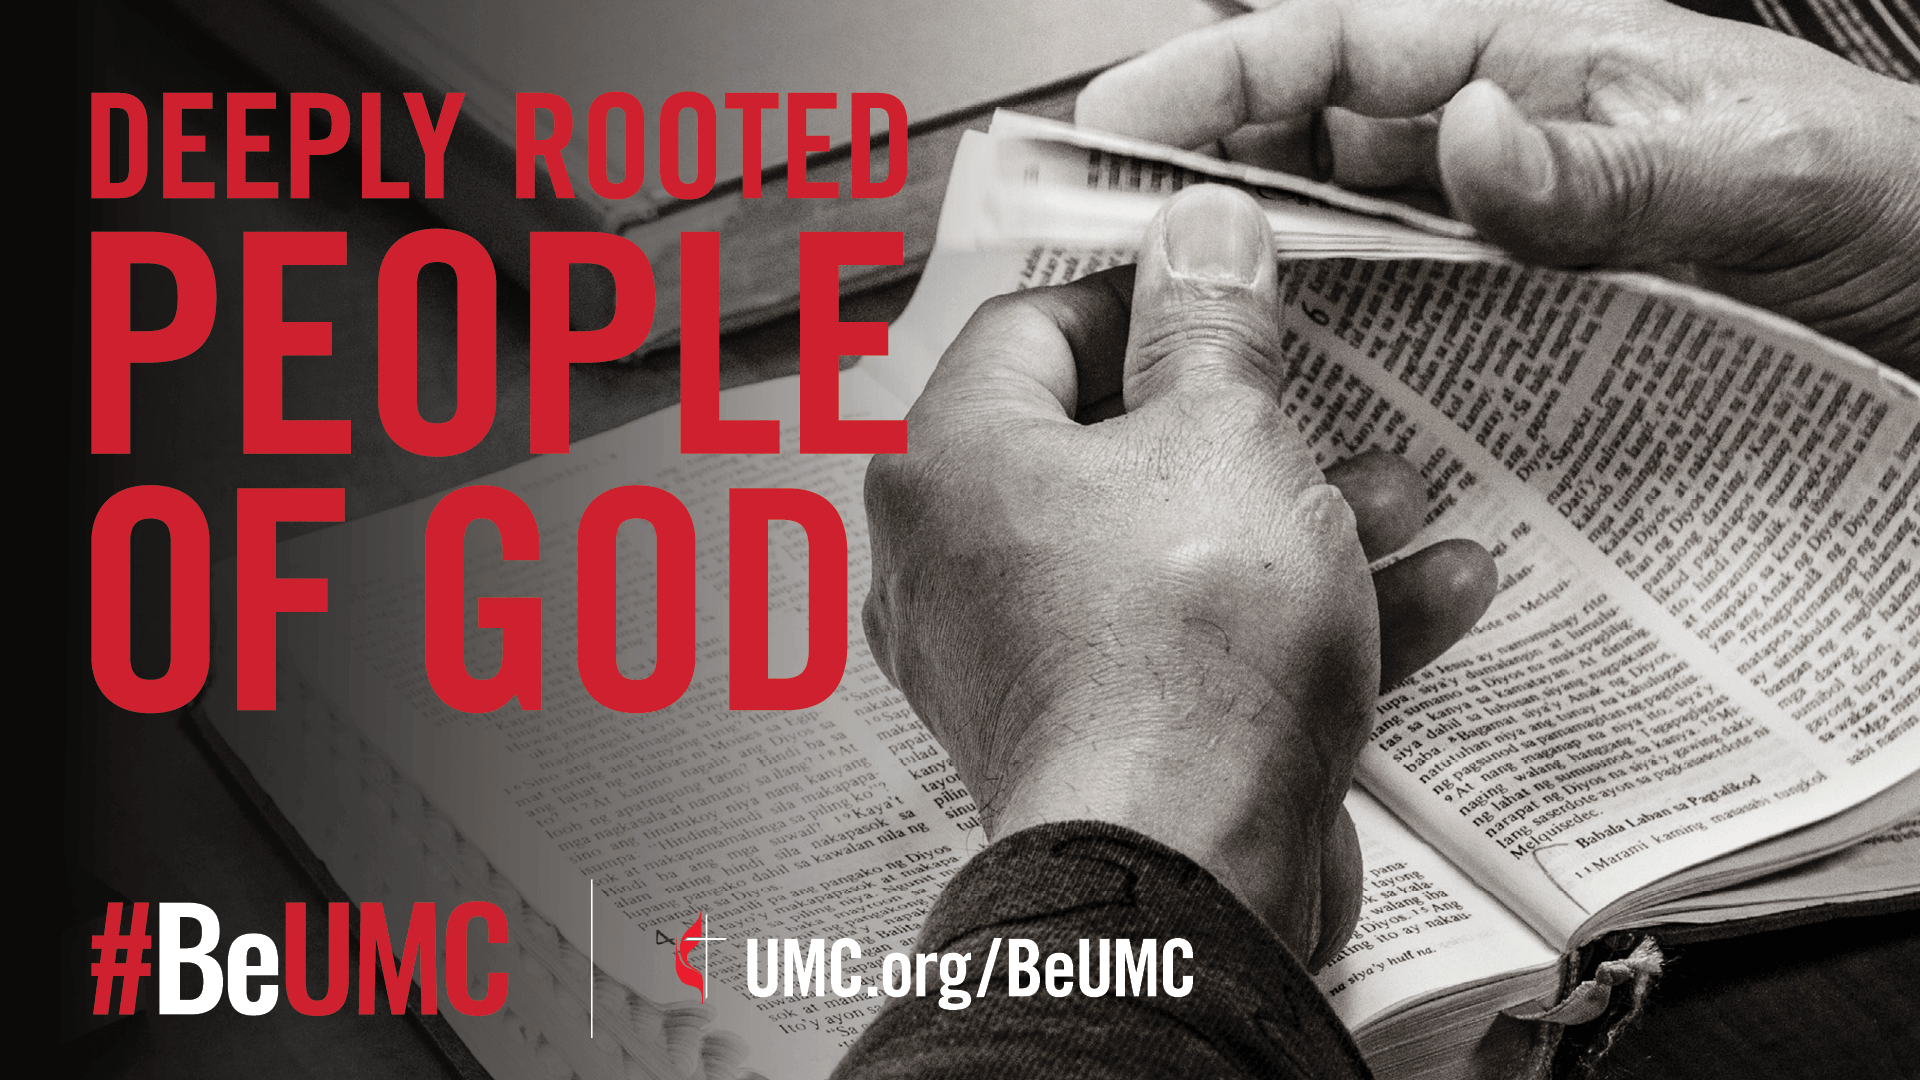 We find commonality in our rich history, sacraments and values. The #BeUMC campaign reminds us of who we are at our best — the spirit-filled, resilient, connected, missional, faithful, diverse, deeply rooted, committed, disciple-making, Jesus-seeking, generous, justice-seeking, world-changing people of God called The United Methodist Church. Worship graphic.